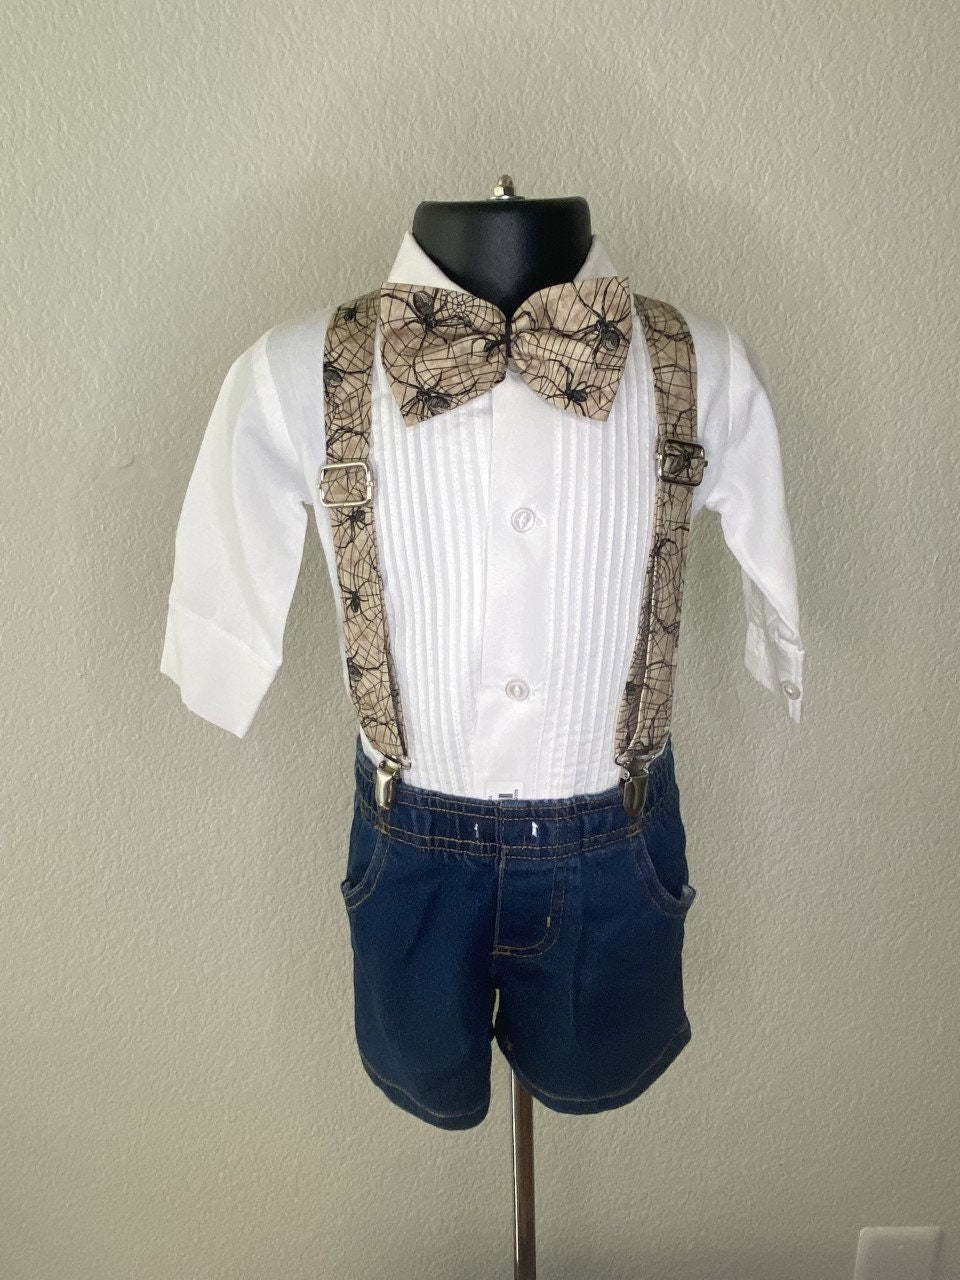 Halloween Scary, Creepy Spider and Web suspenders and bow tie / Infant, Toddler, Child, Teen, Adult, Big & Tall